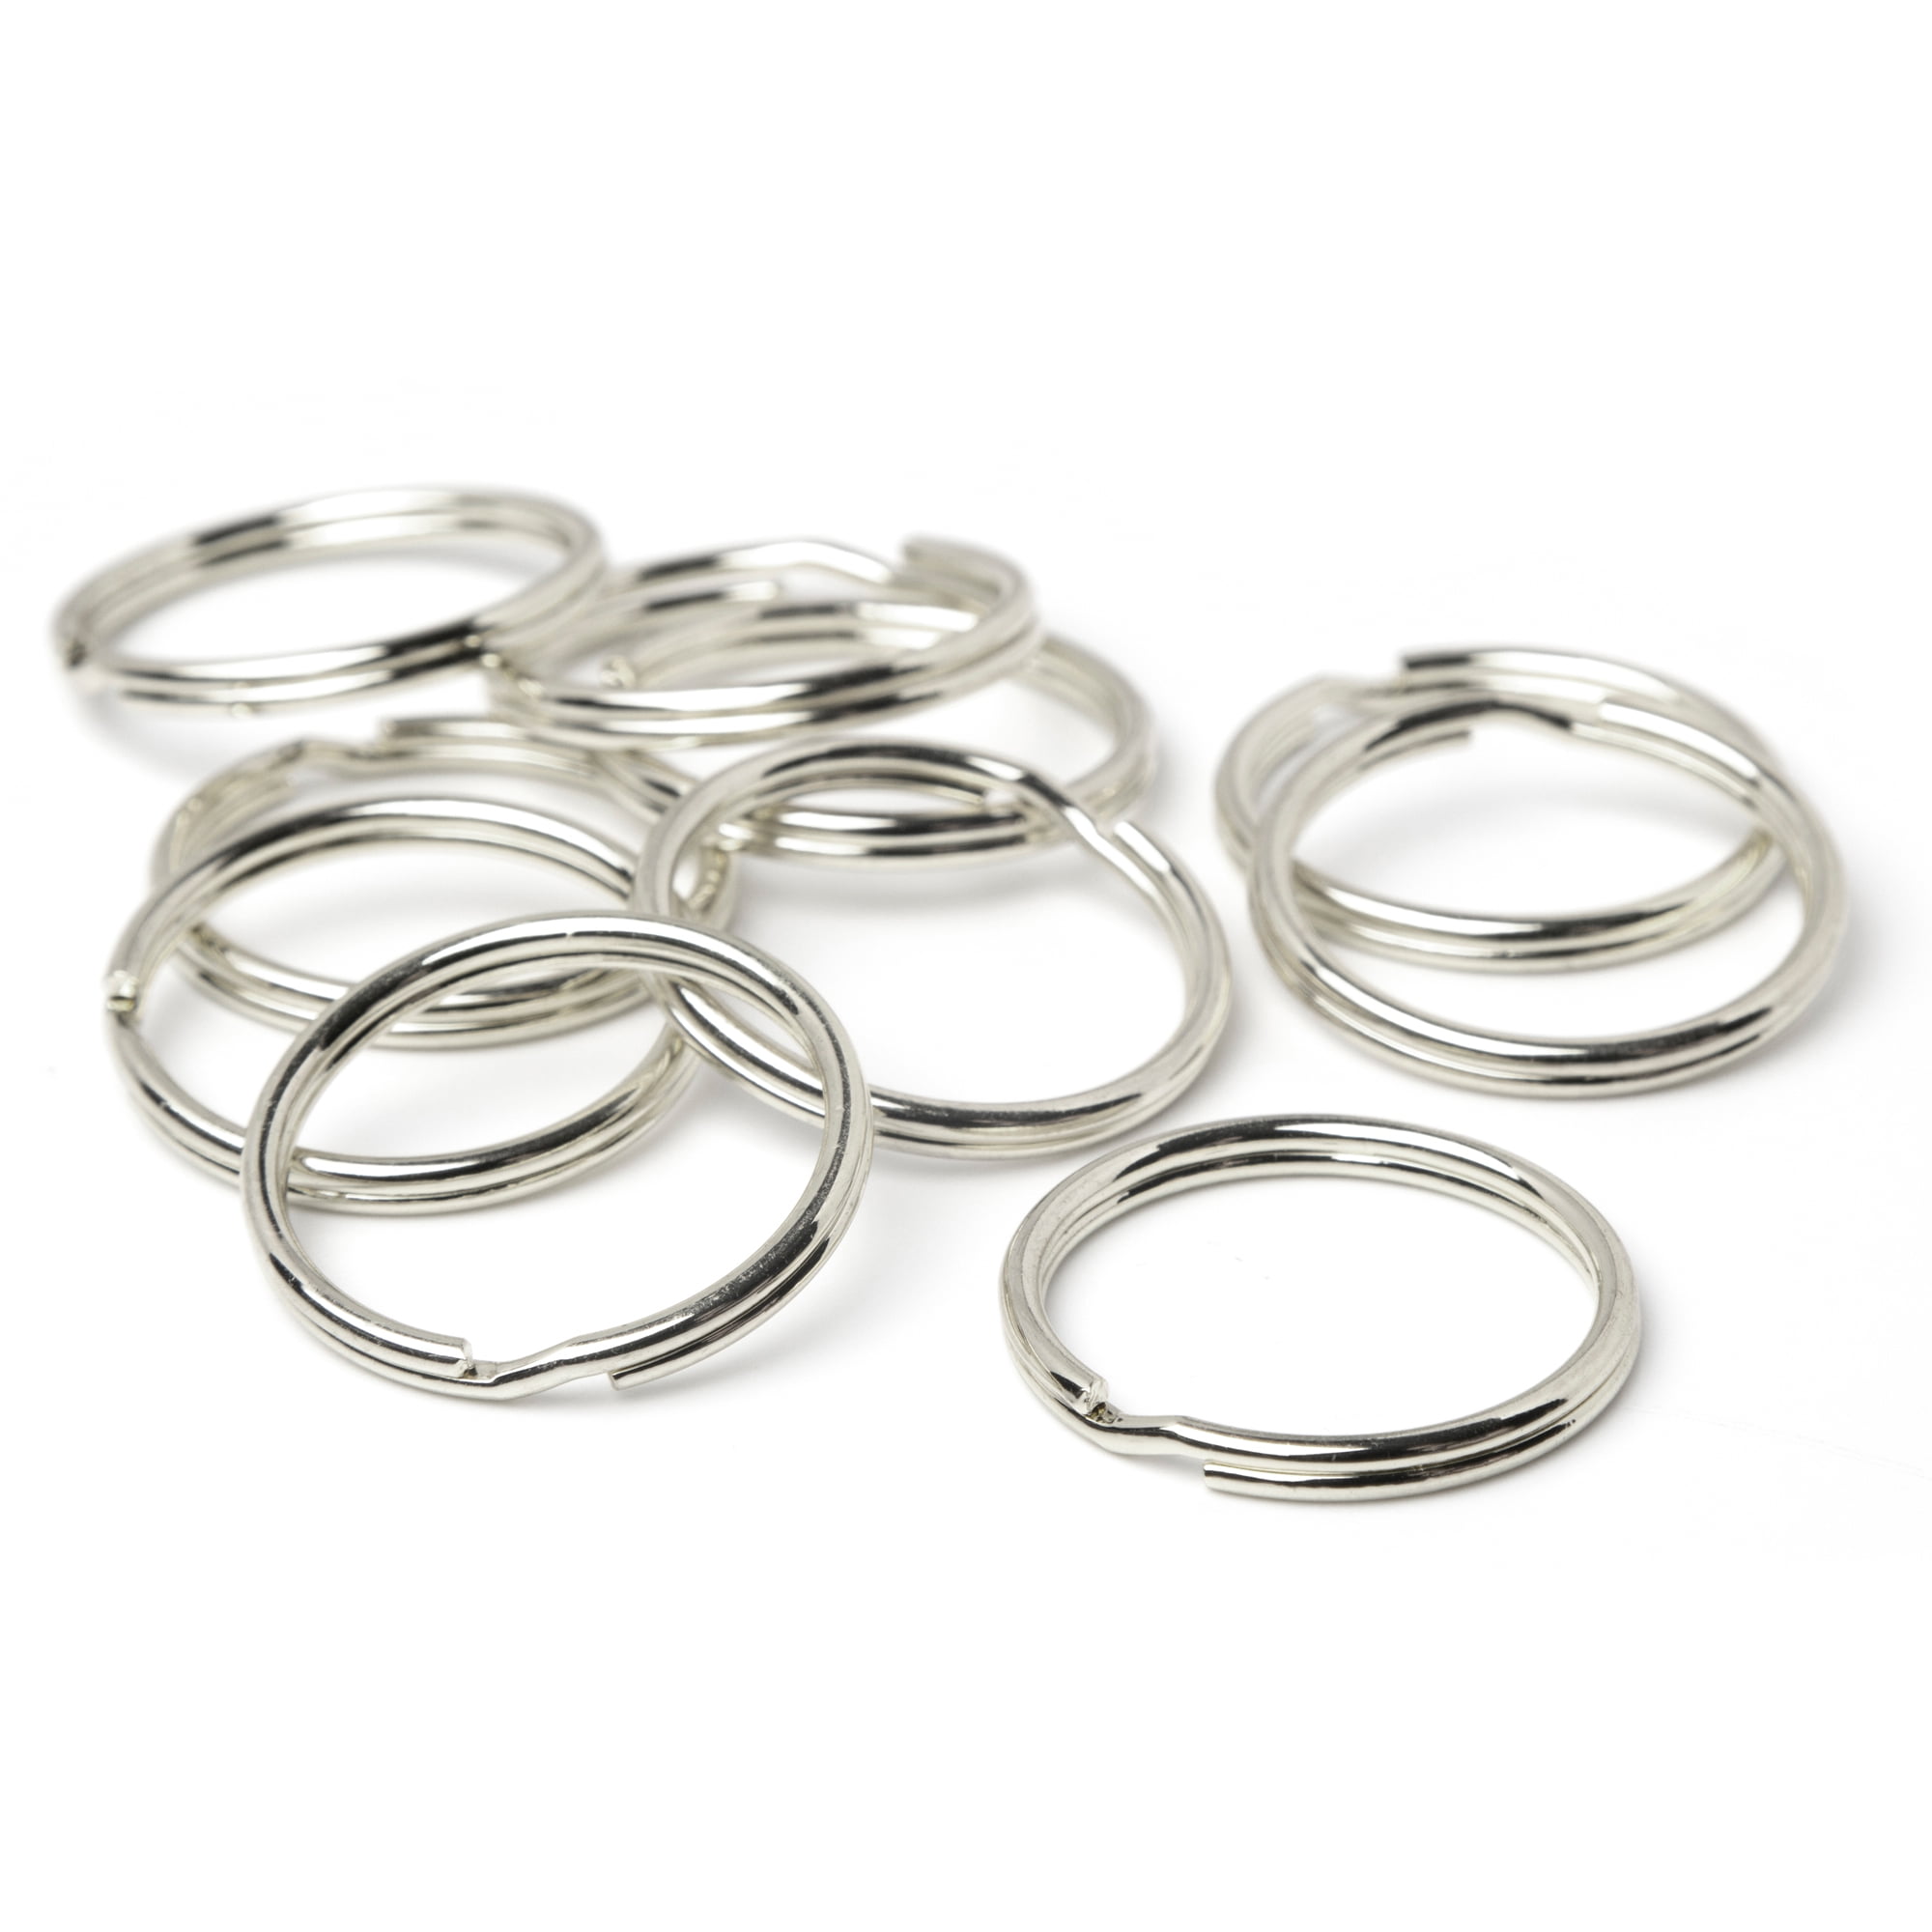 LOT OF ELEVEN ASSORTED SIZES SPLIT KEY RING ASSORTMENT HIGH QUALITY RINGS